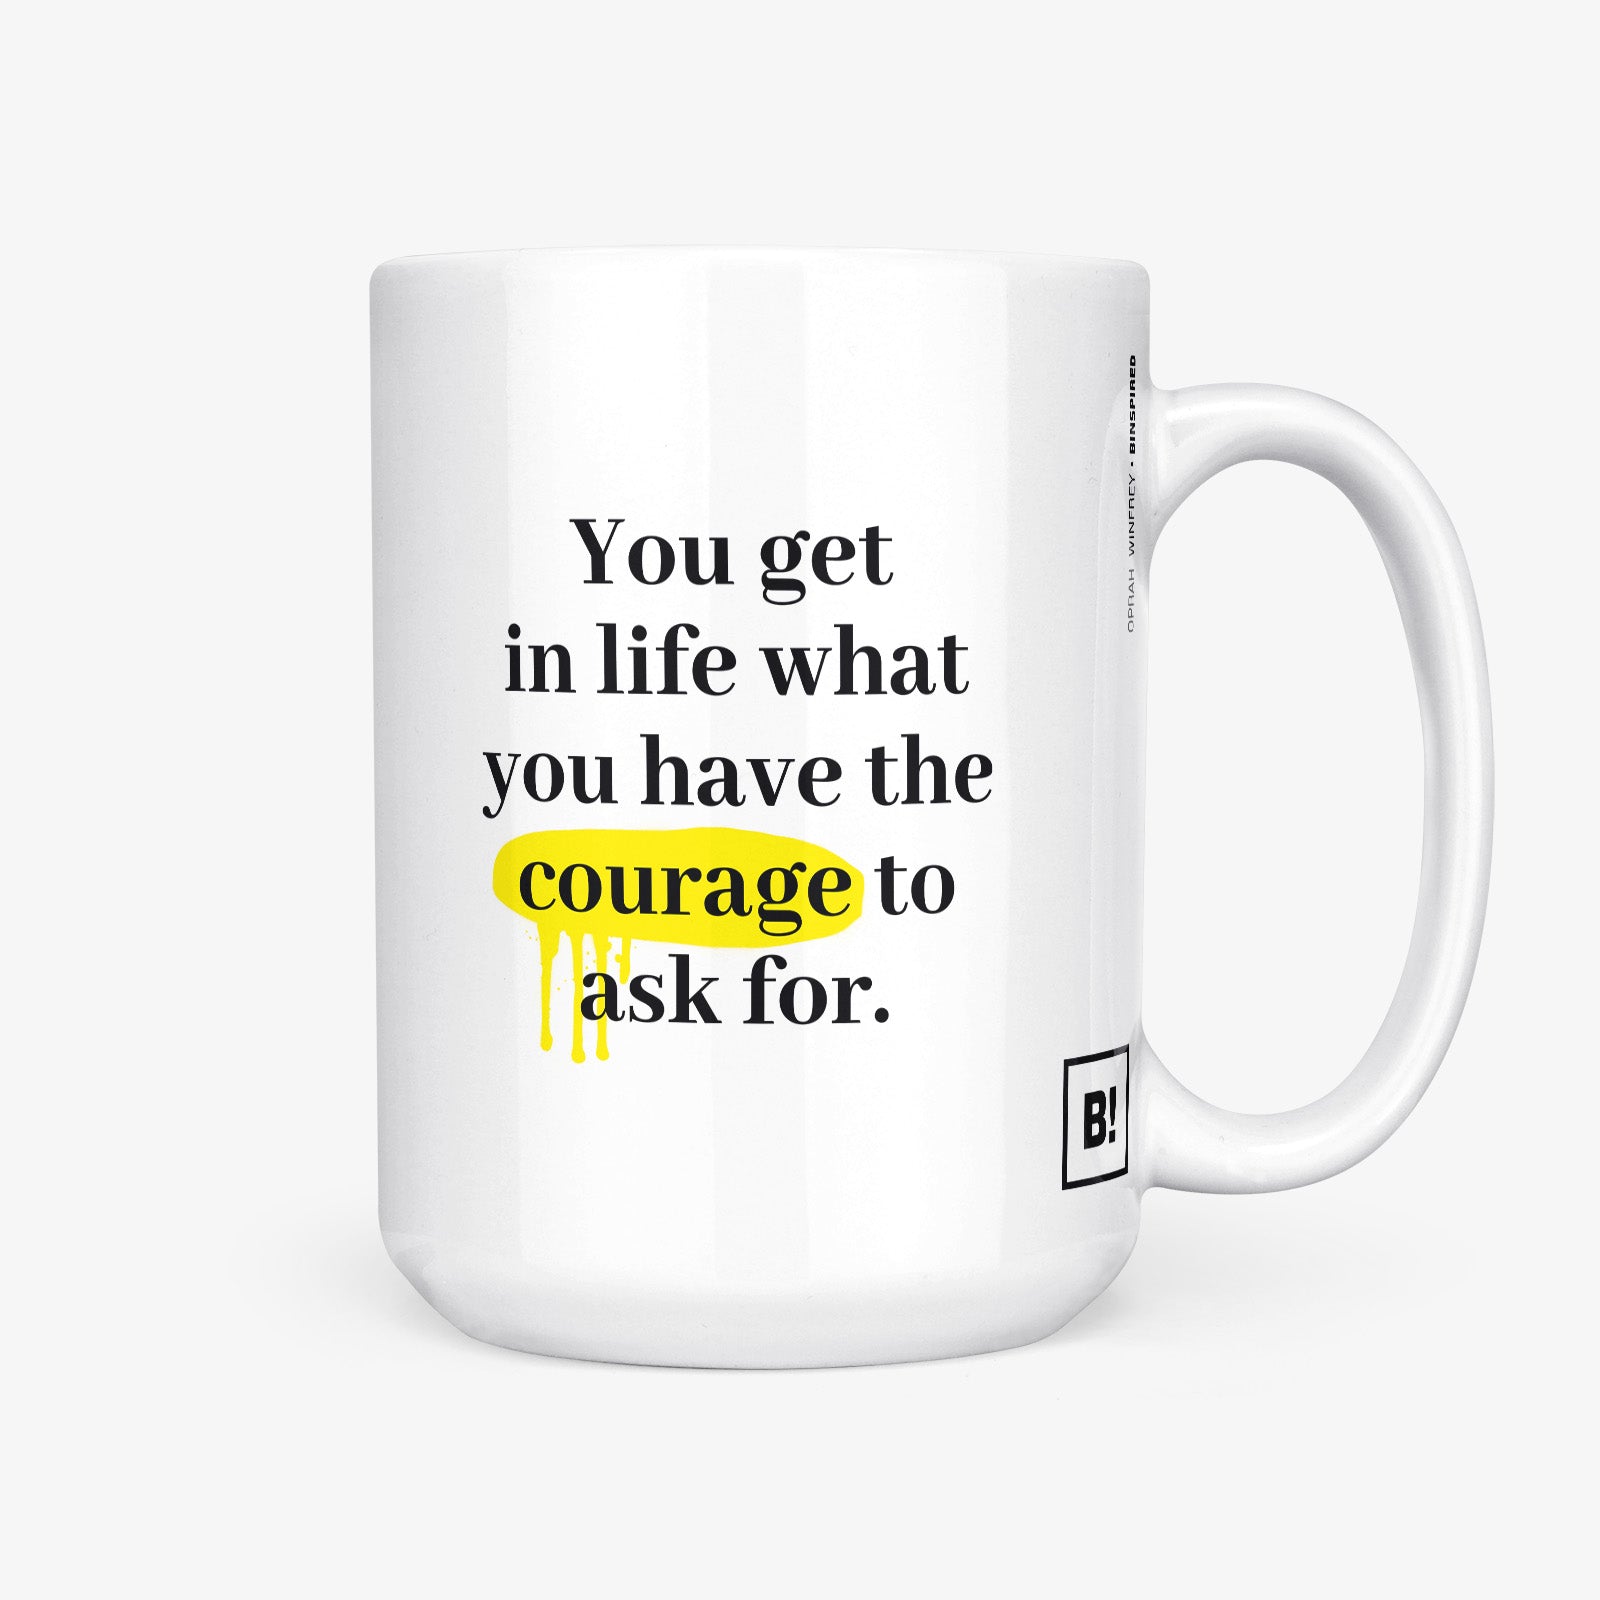 Be inspired by Oprah Winfrey's famous quote, "You get in life what you have the courage to ask for" on this white and glossy 15oz coffee mug with the handle on the right.